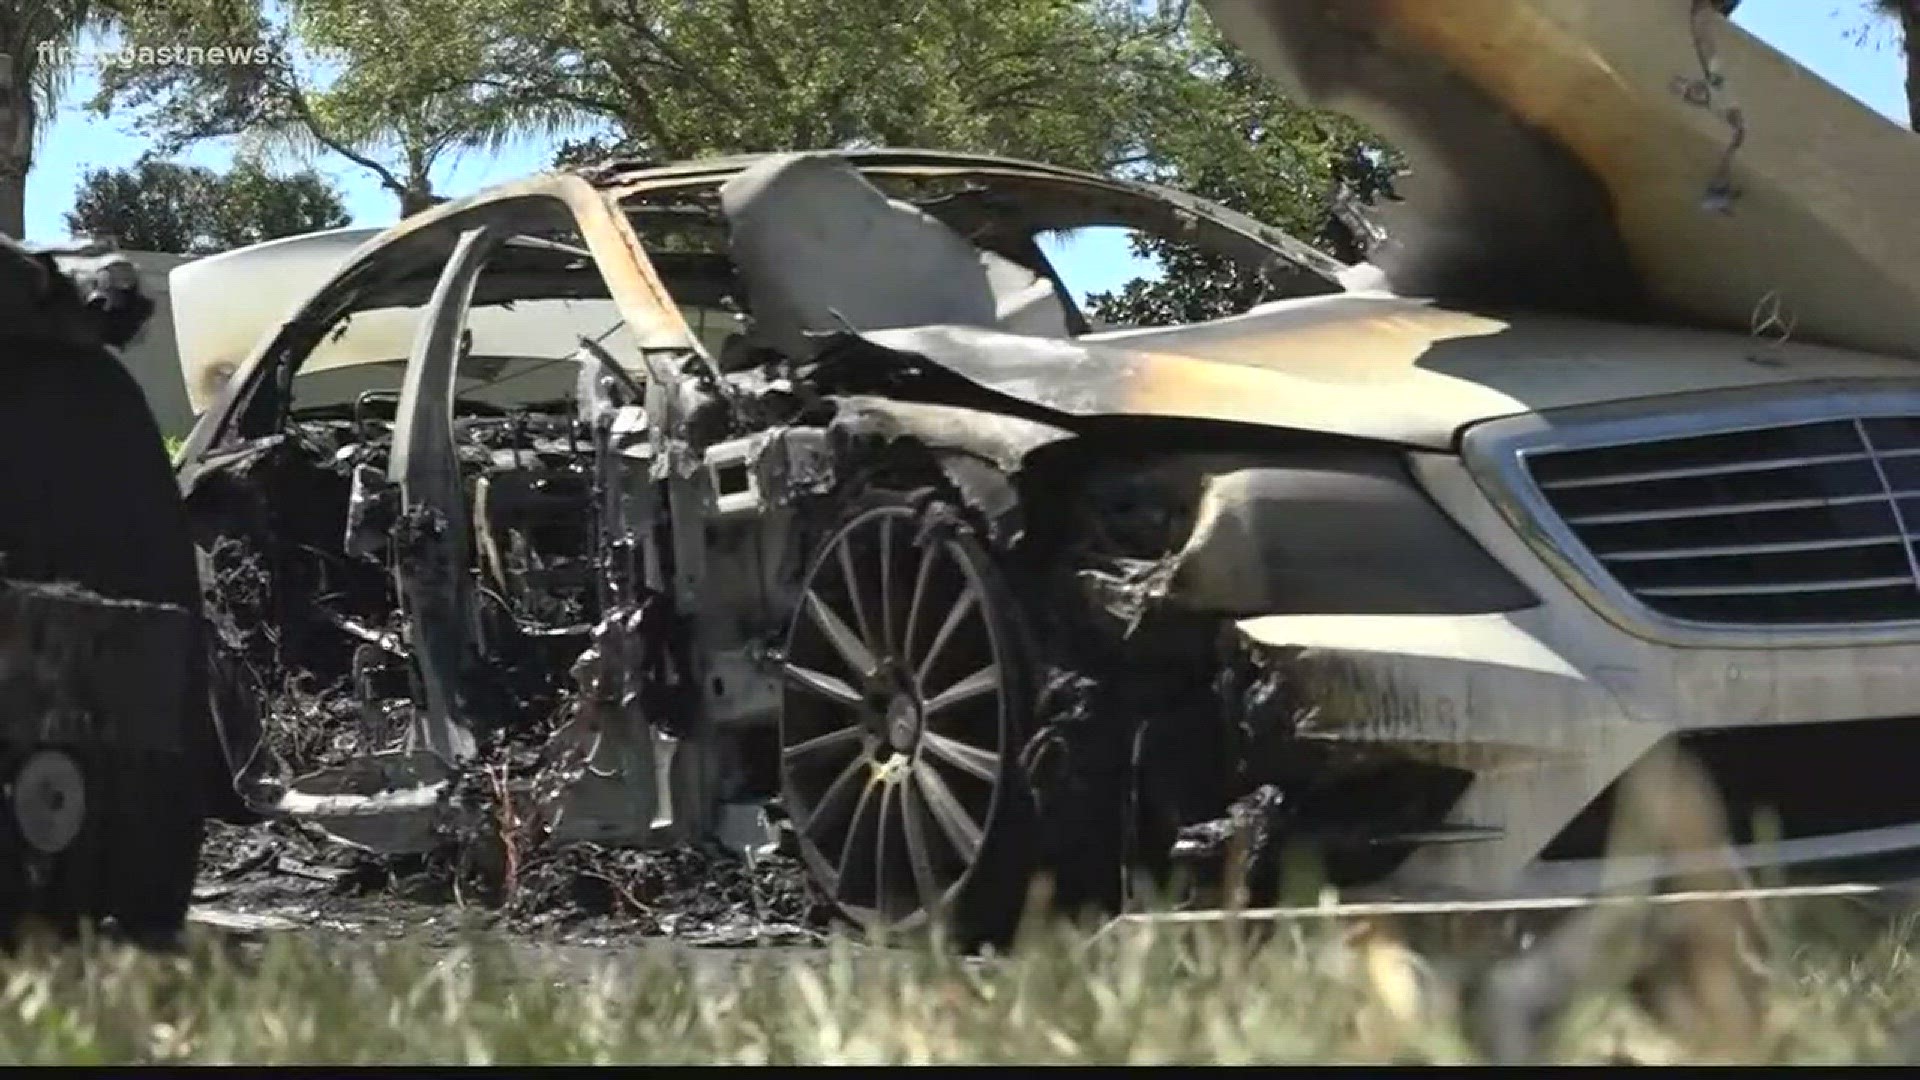 Two luxury cars were torched overnight.